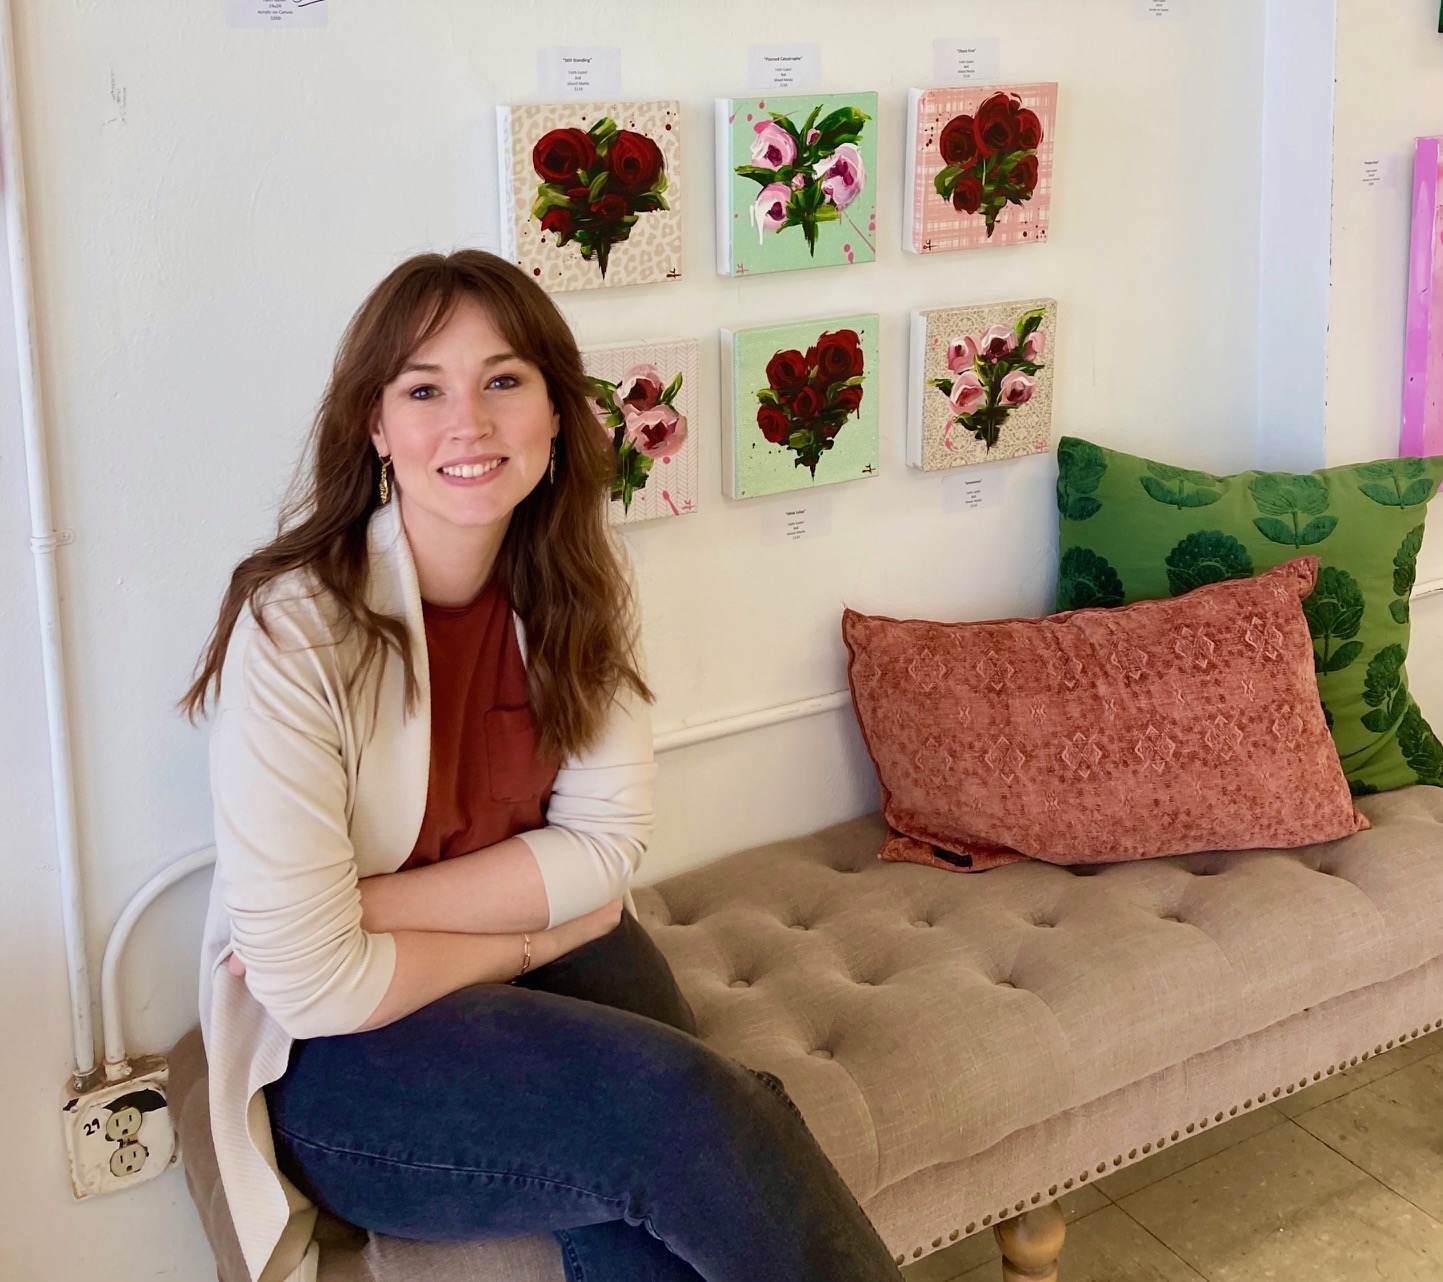 Faith Gabel sits in front of her 6 of her small square floral painting. Faith is a young white woman with long dark hair. She is wearing jeans, a white cardigan and red top, sitting on a tufted bench.